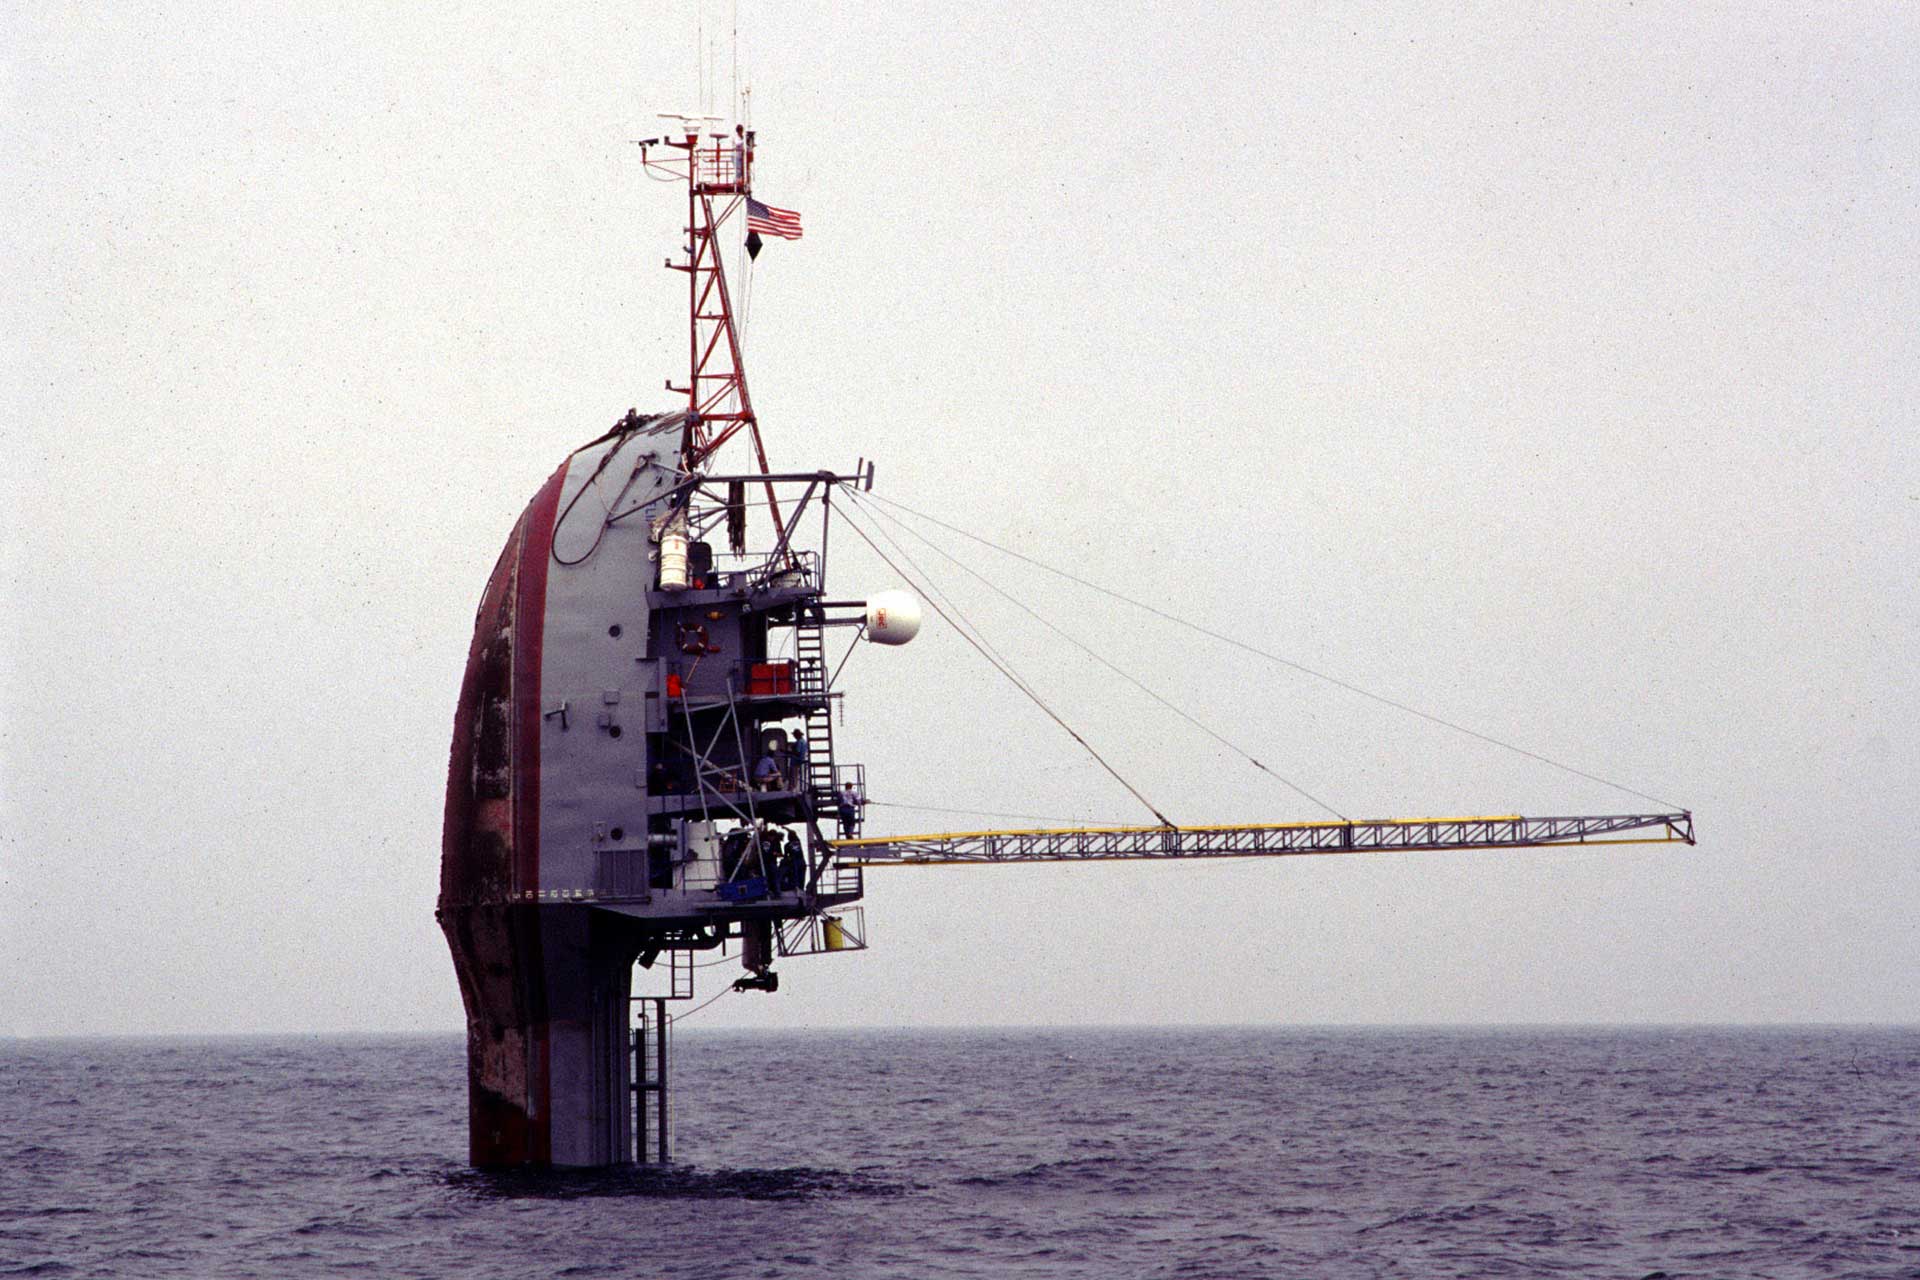 The RF Flip (Floating Instrument Platform) is the open ocean research vessel owned by the Office of Naval Research and operated by Scripps Institutions of Oceanography